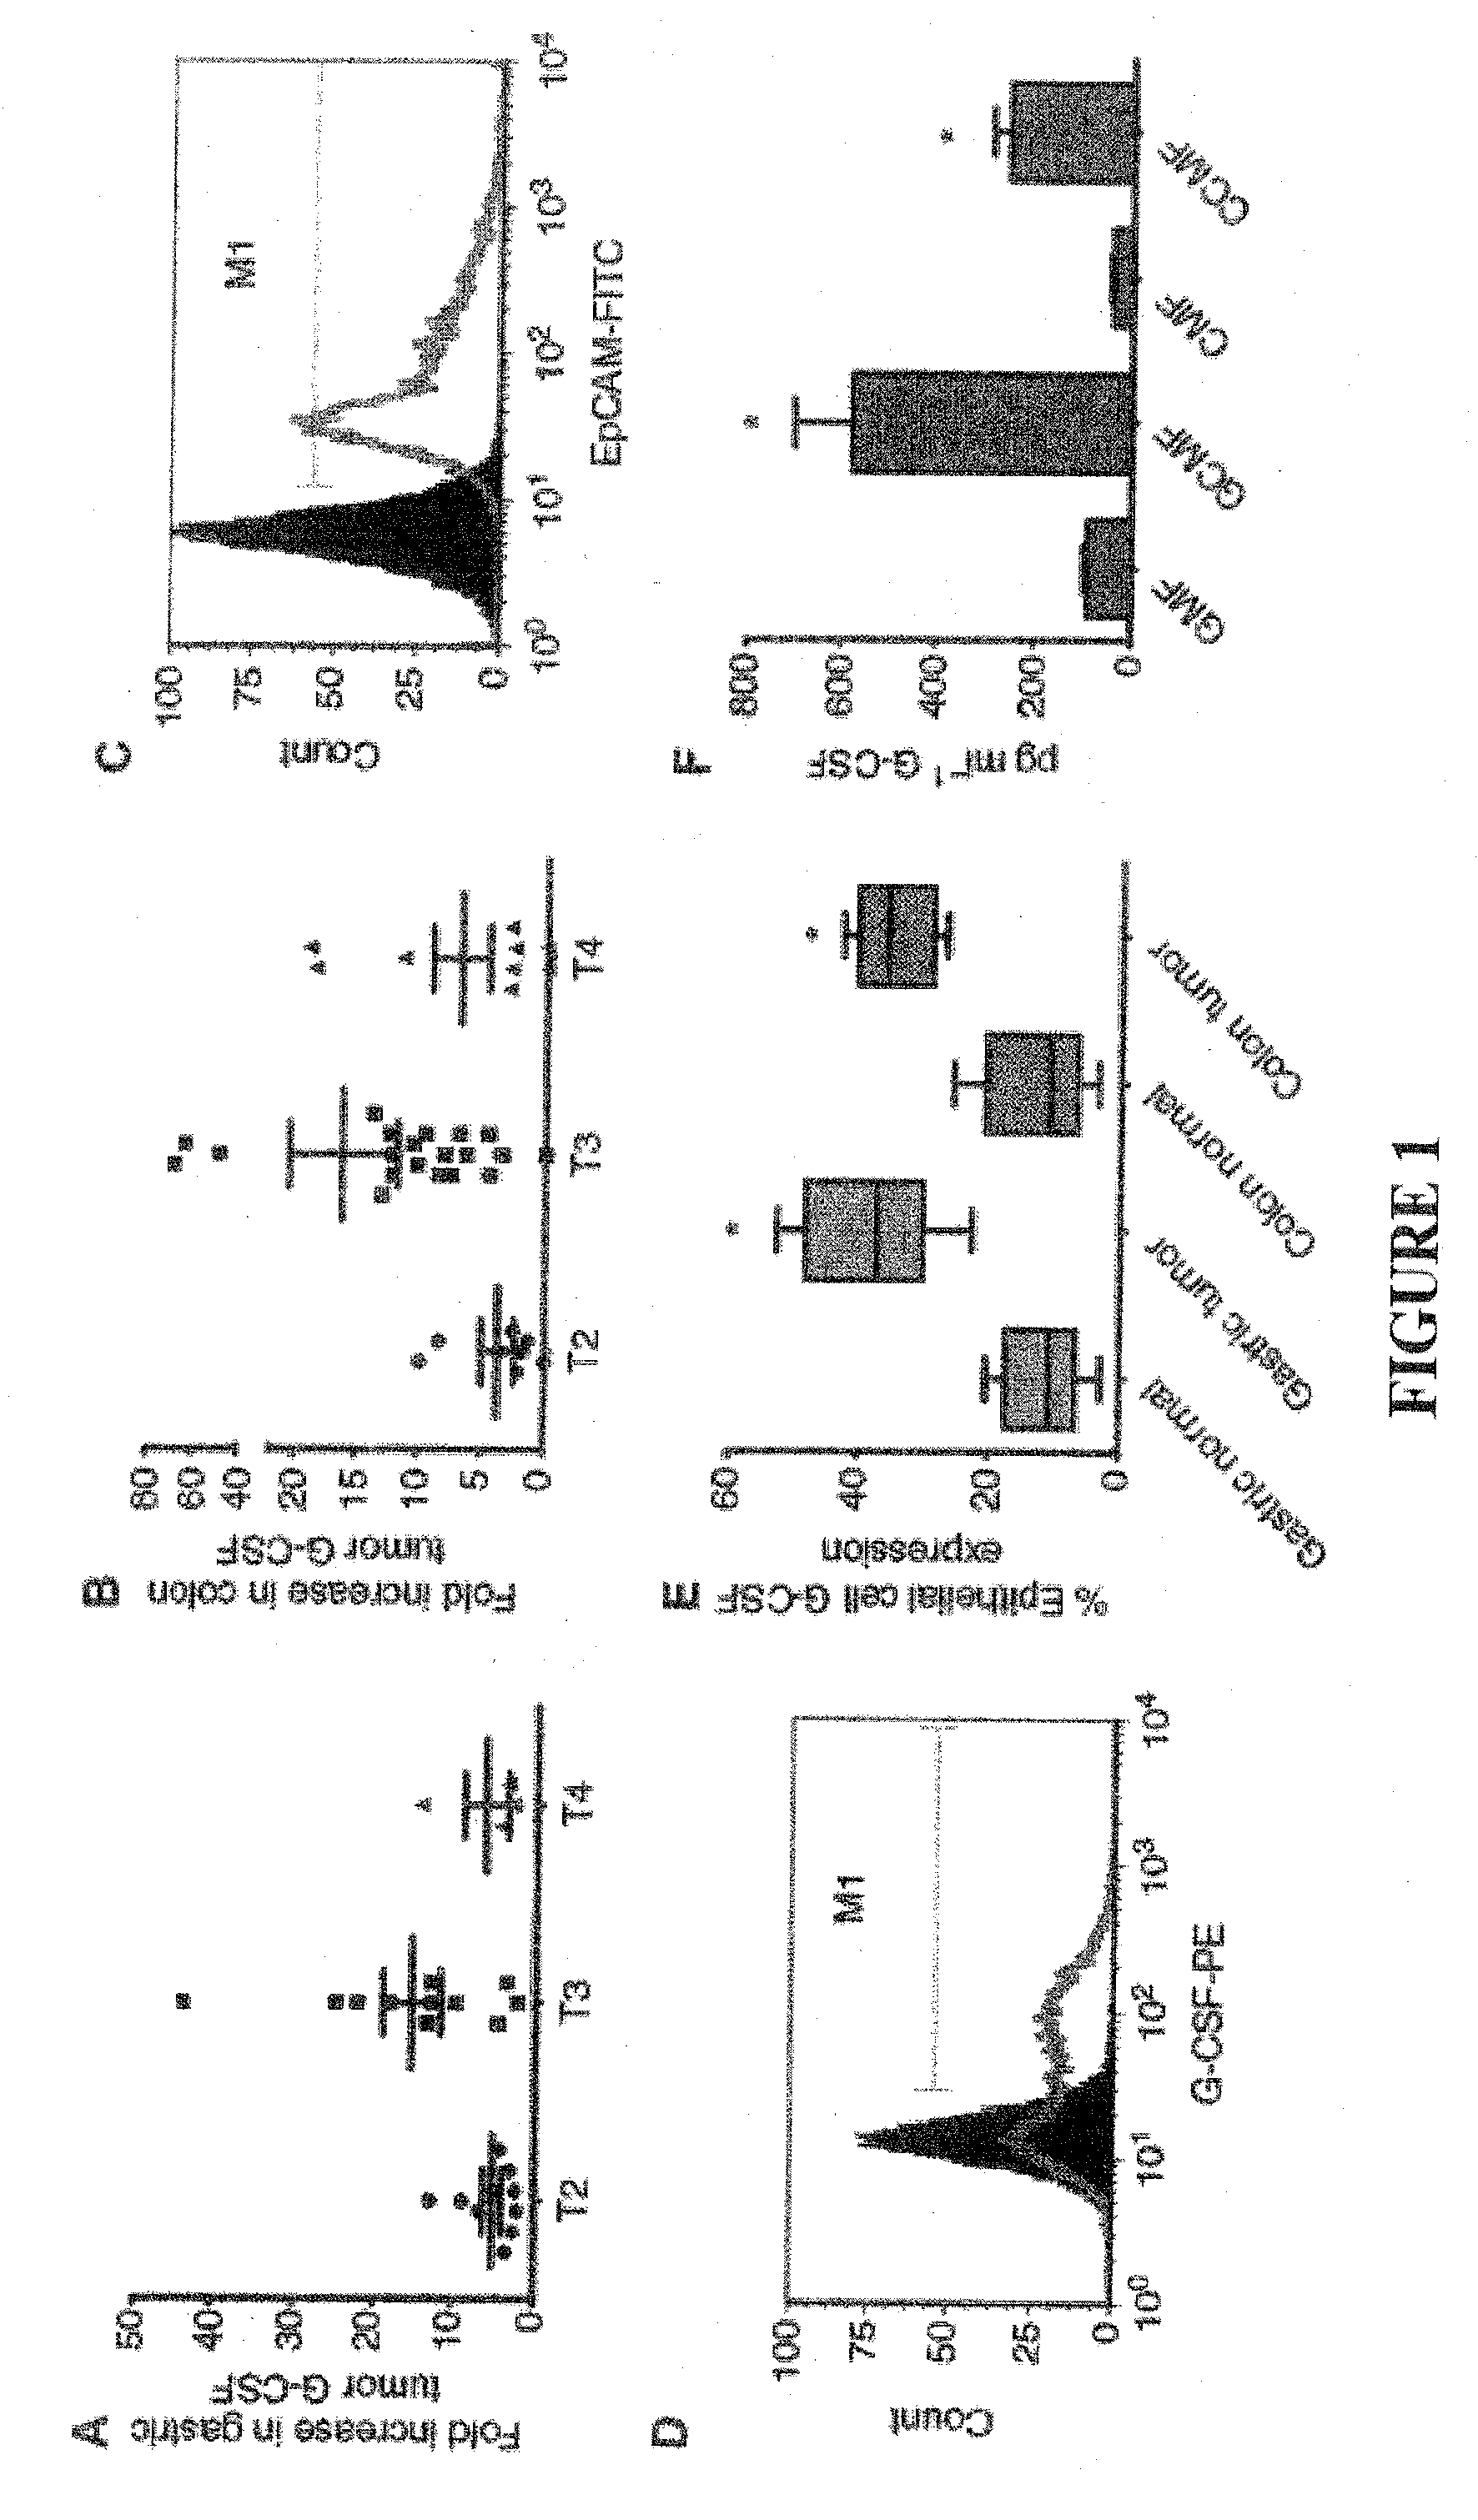 Inhibition of granulocyte colony stimulating factor in the treatment of cancer